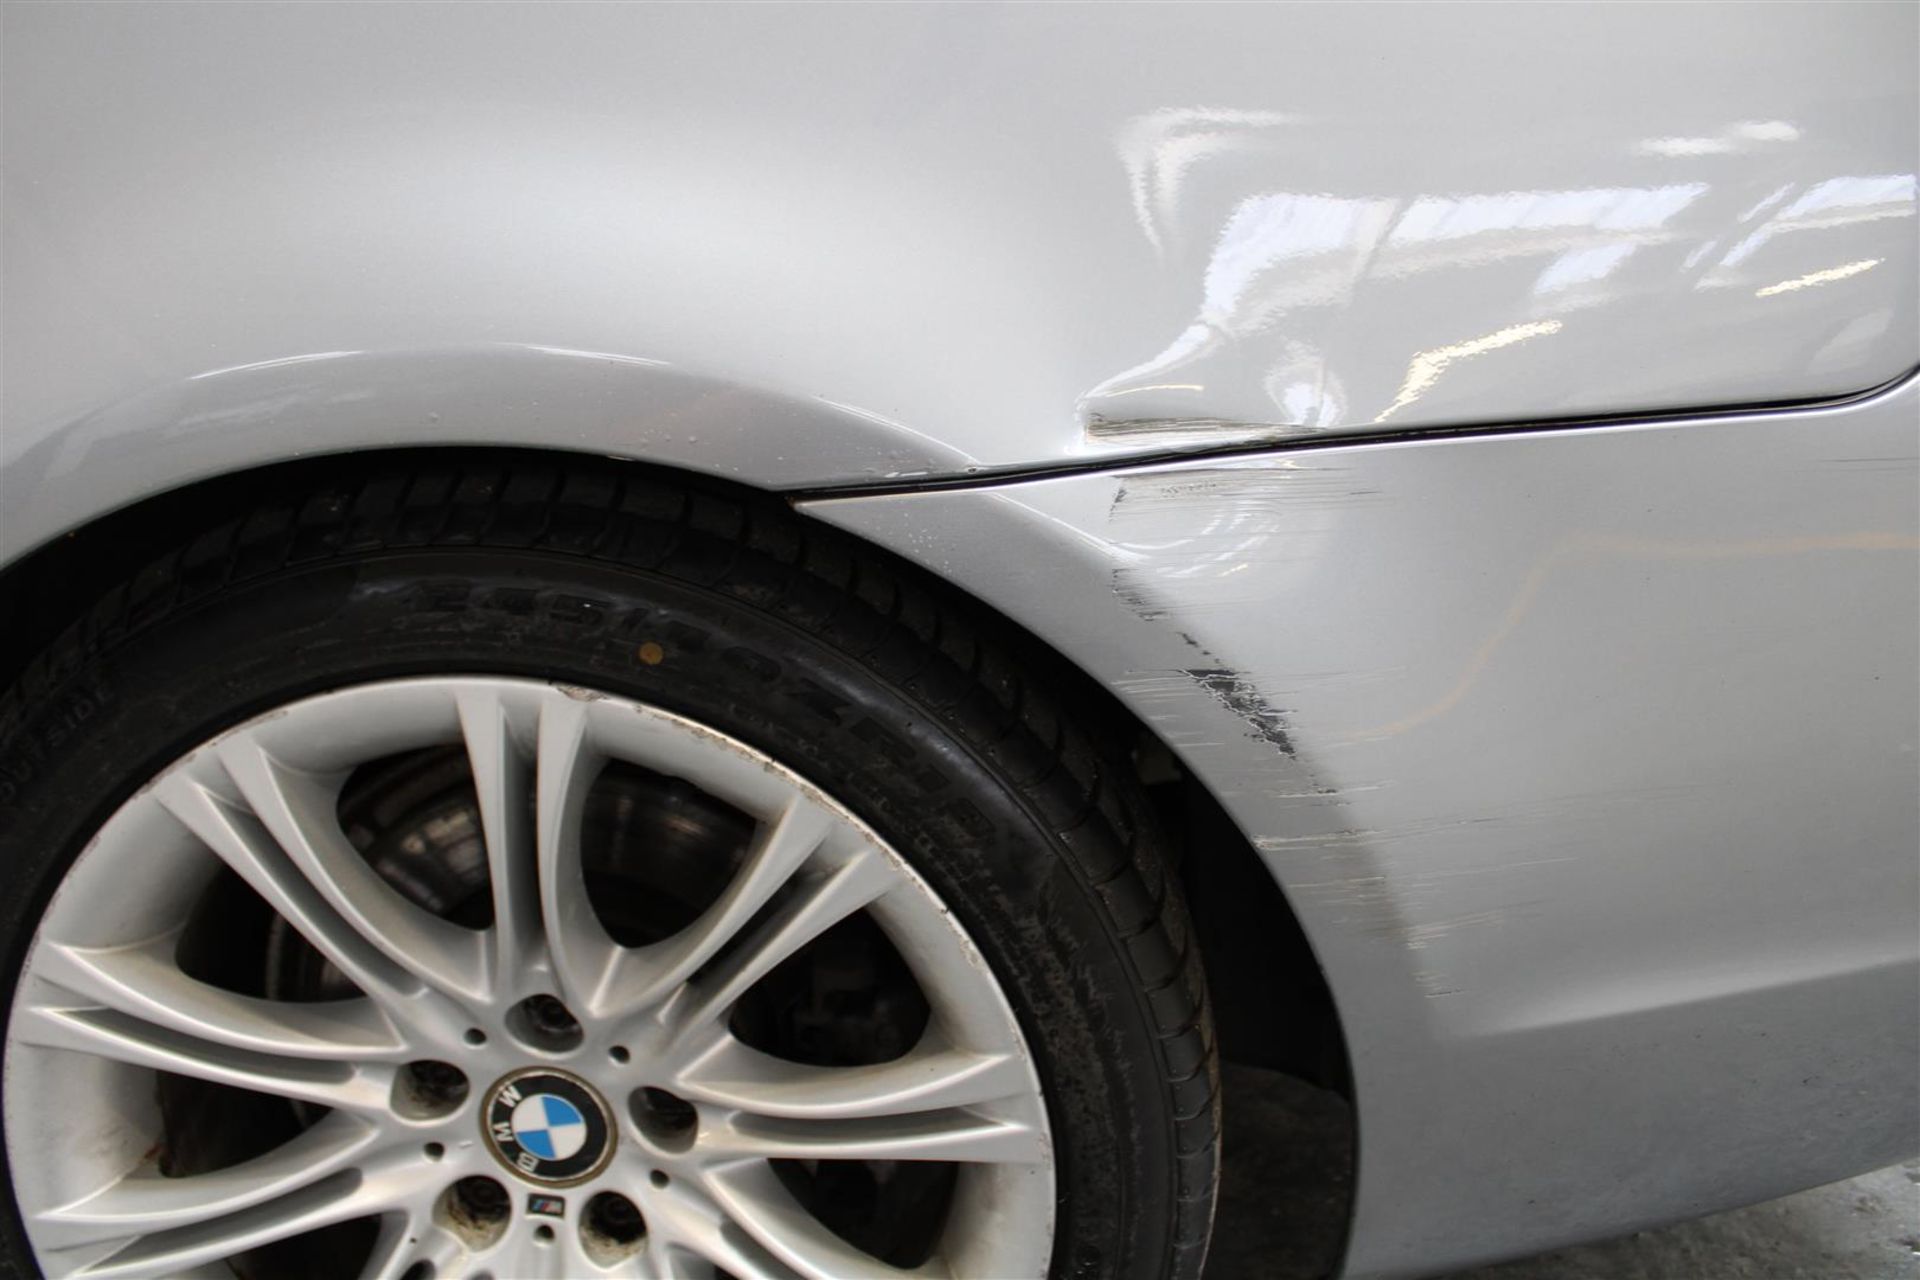 56 06 BMW 520D M Sport Touring Auto - Image 16 of 36